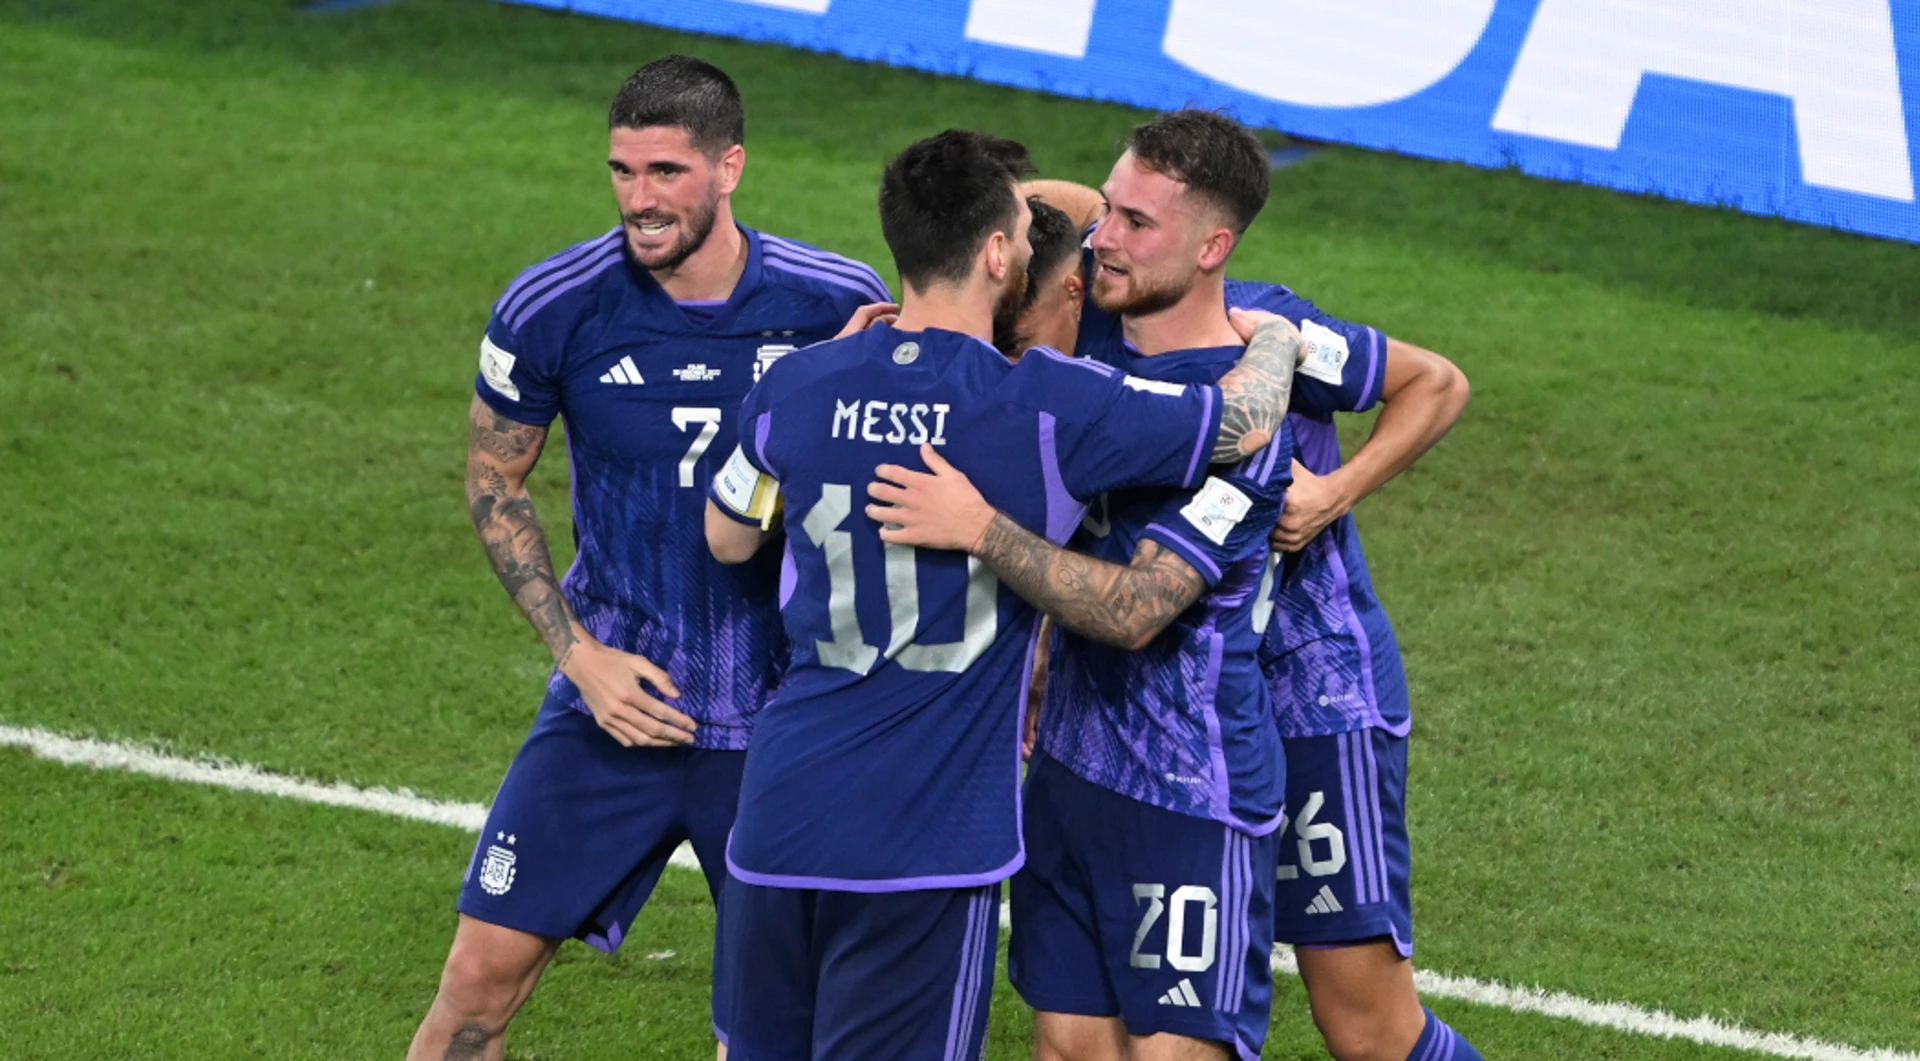 Messi misses penalty but Argentina advance at World Cup